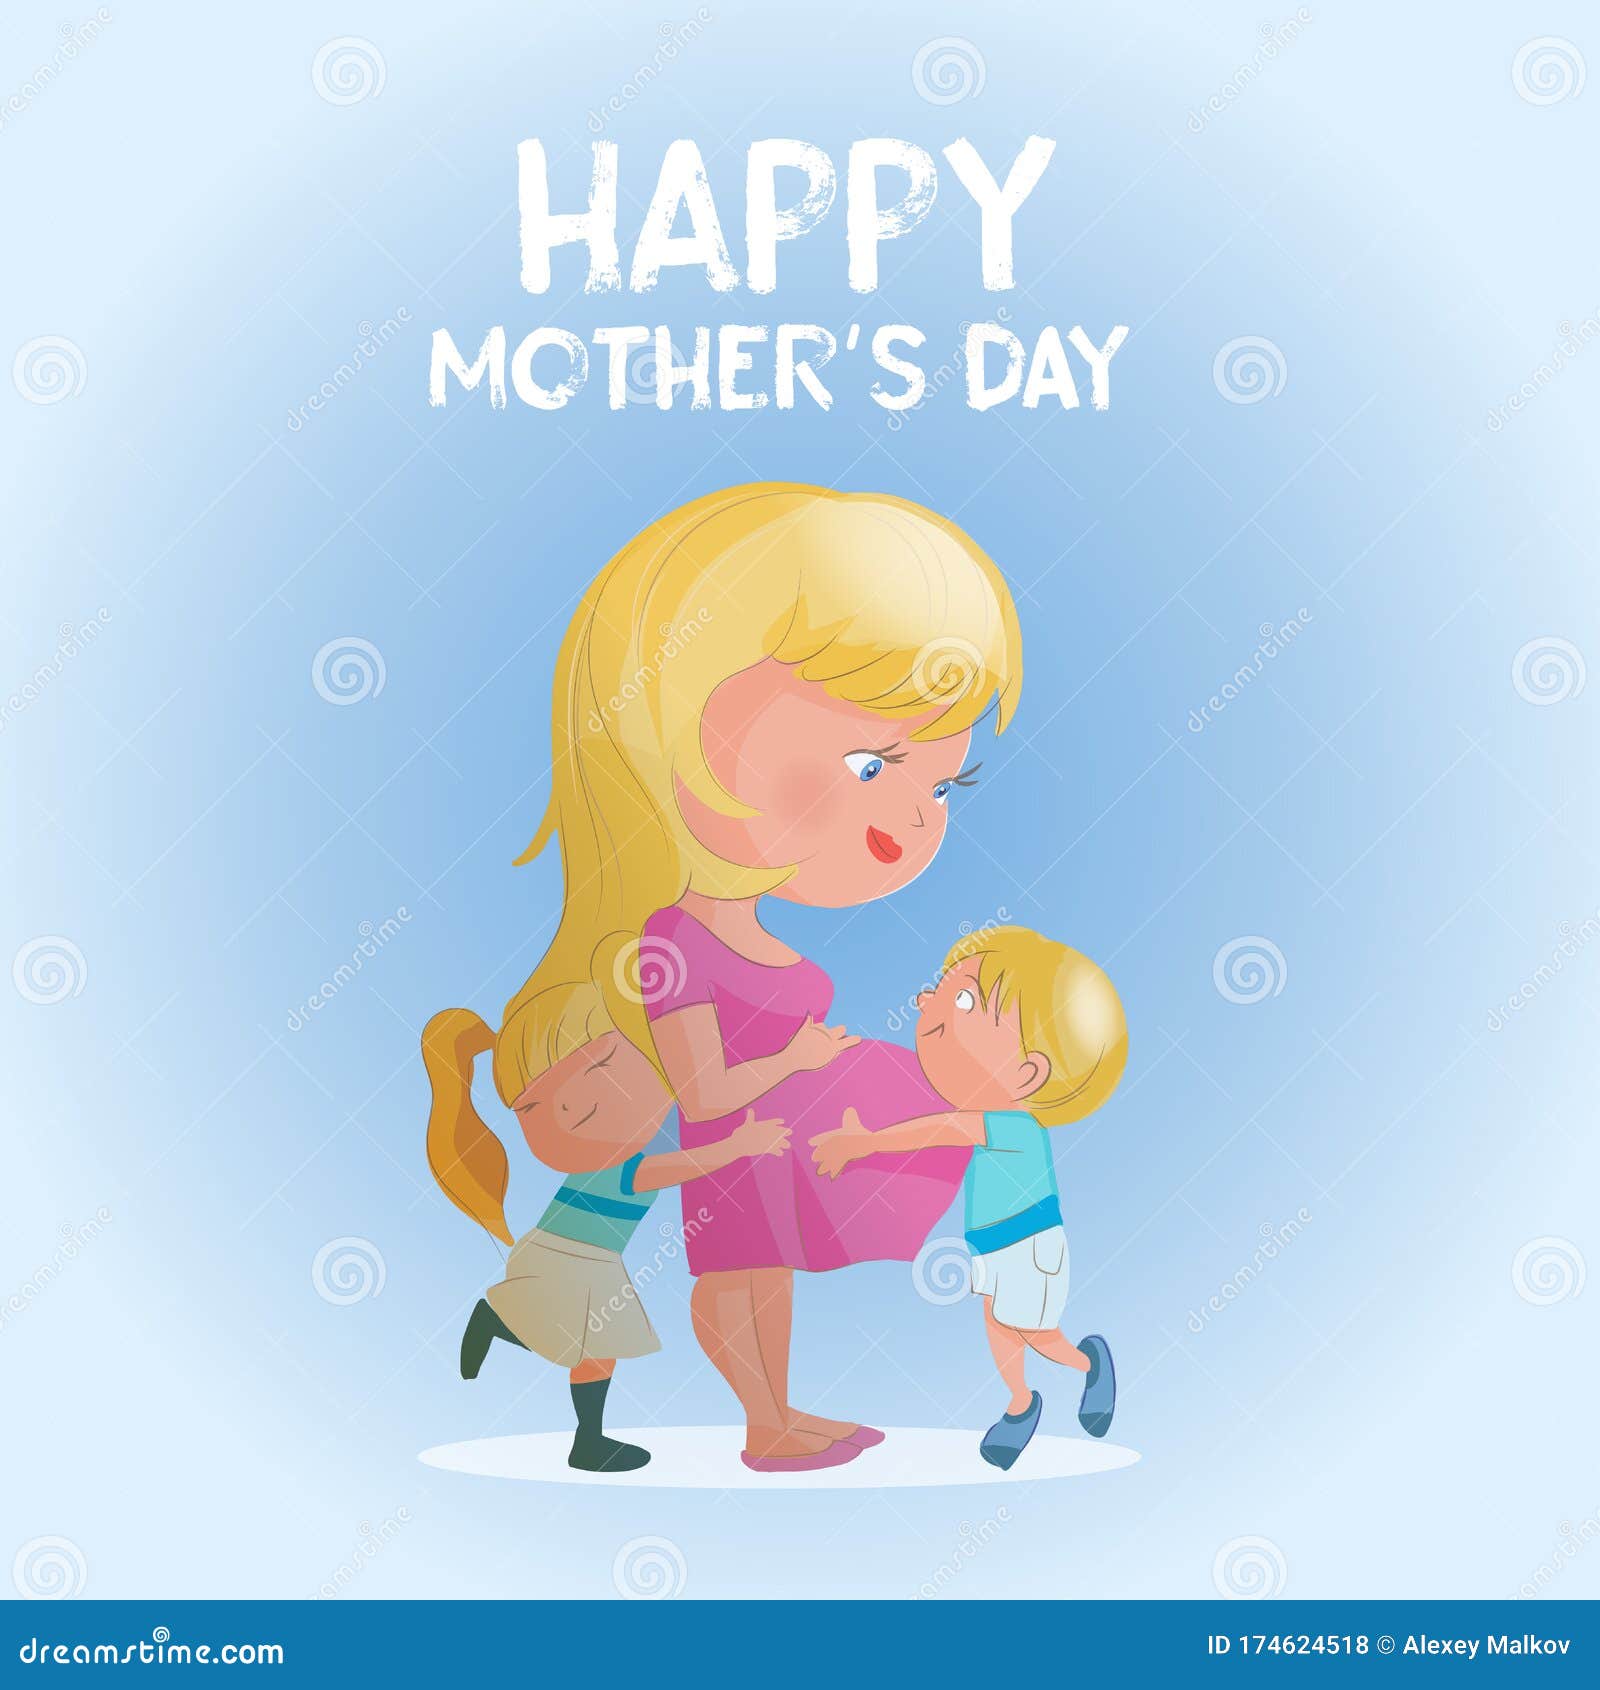 COVASA Mens Summer ShortsHappy Mothers Day Greeting with Cartoon Style Mom and